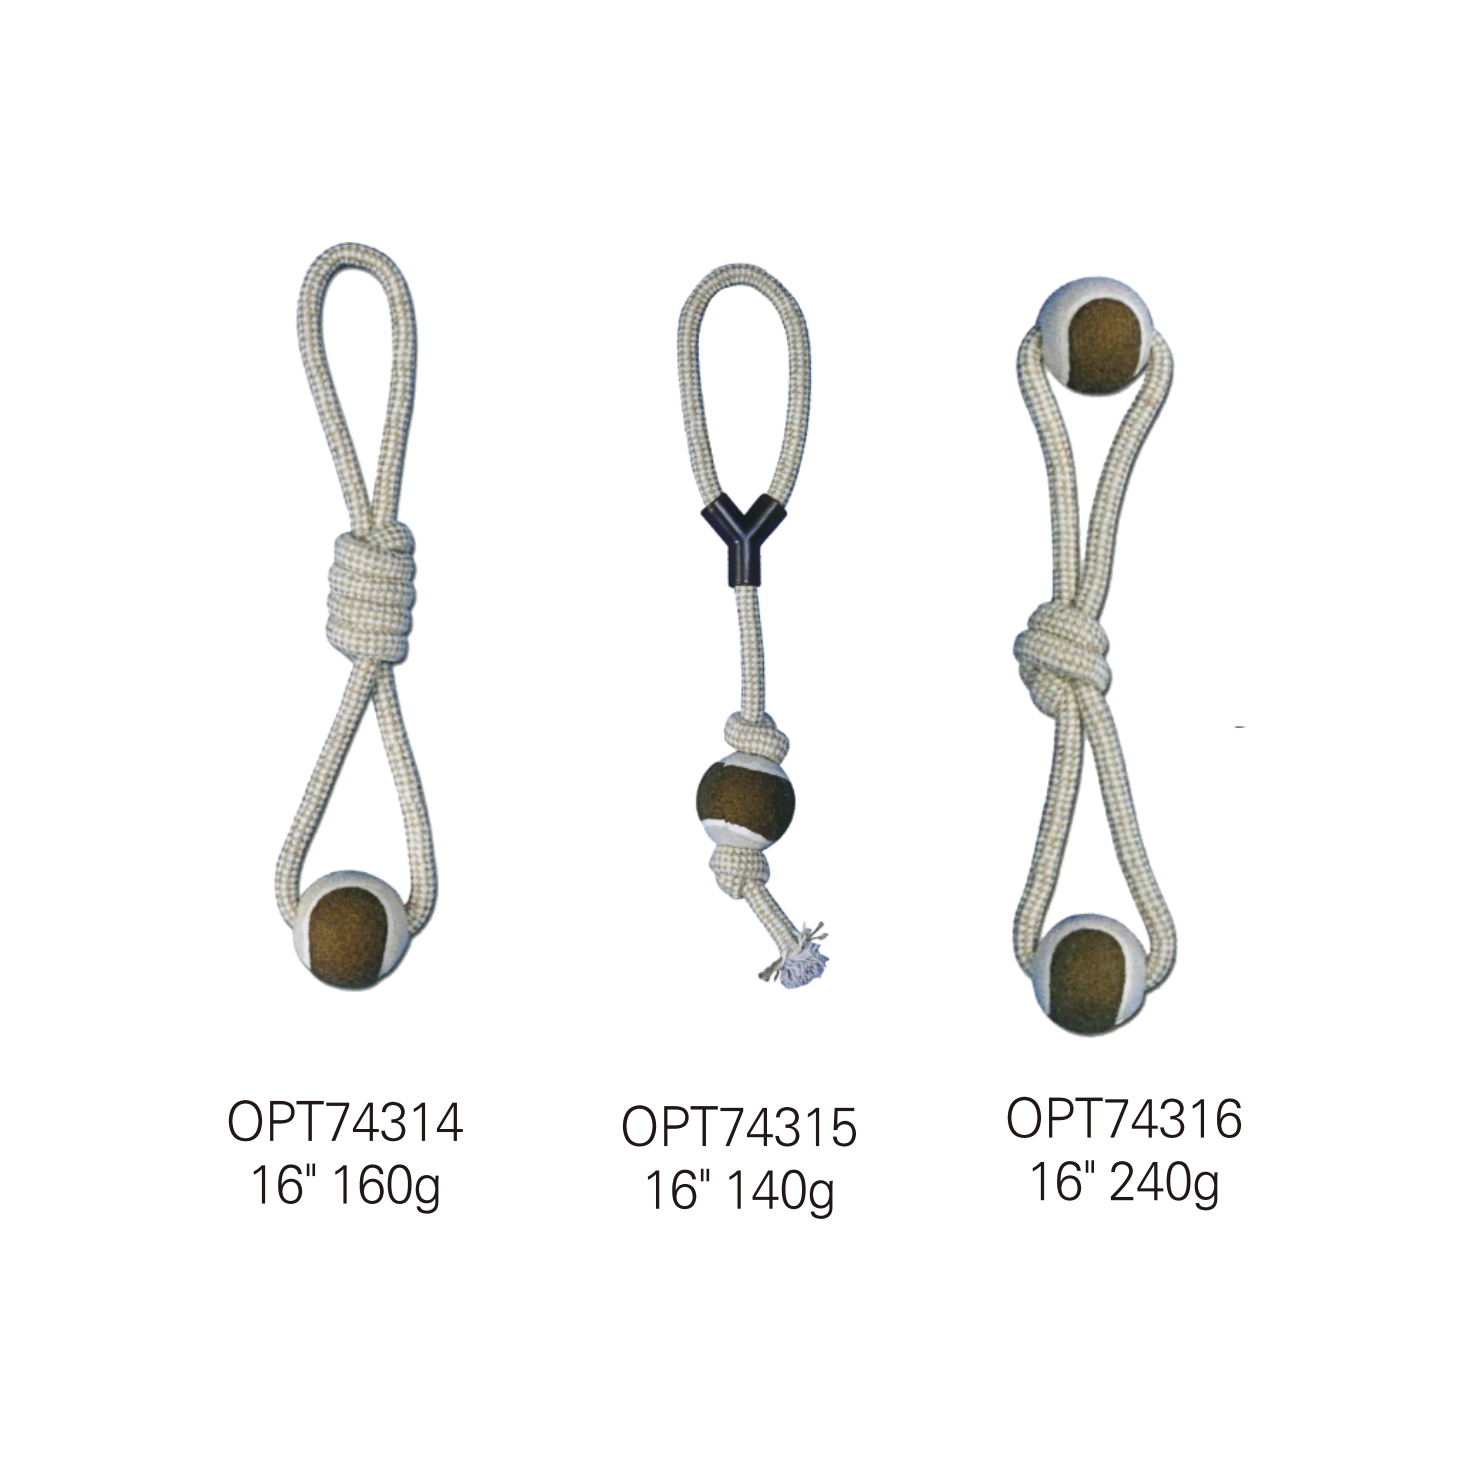 OPT74314-OPT74316 Dog toy rope